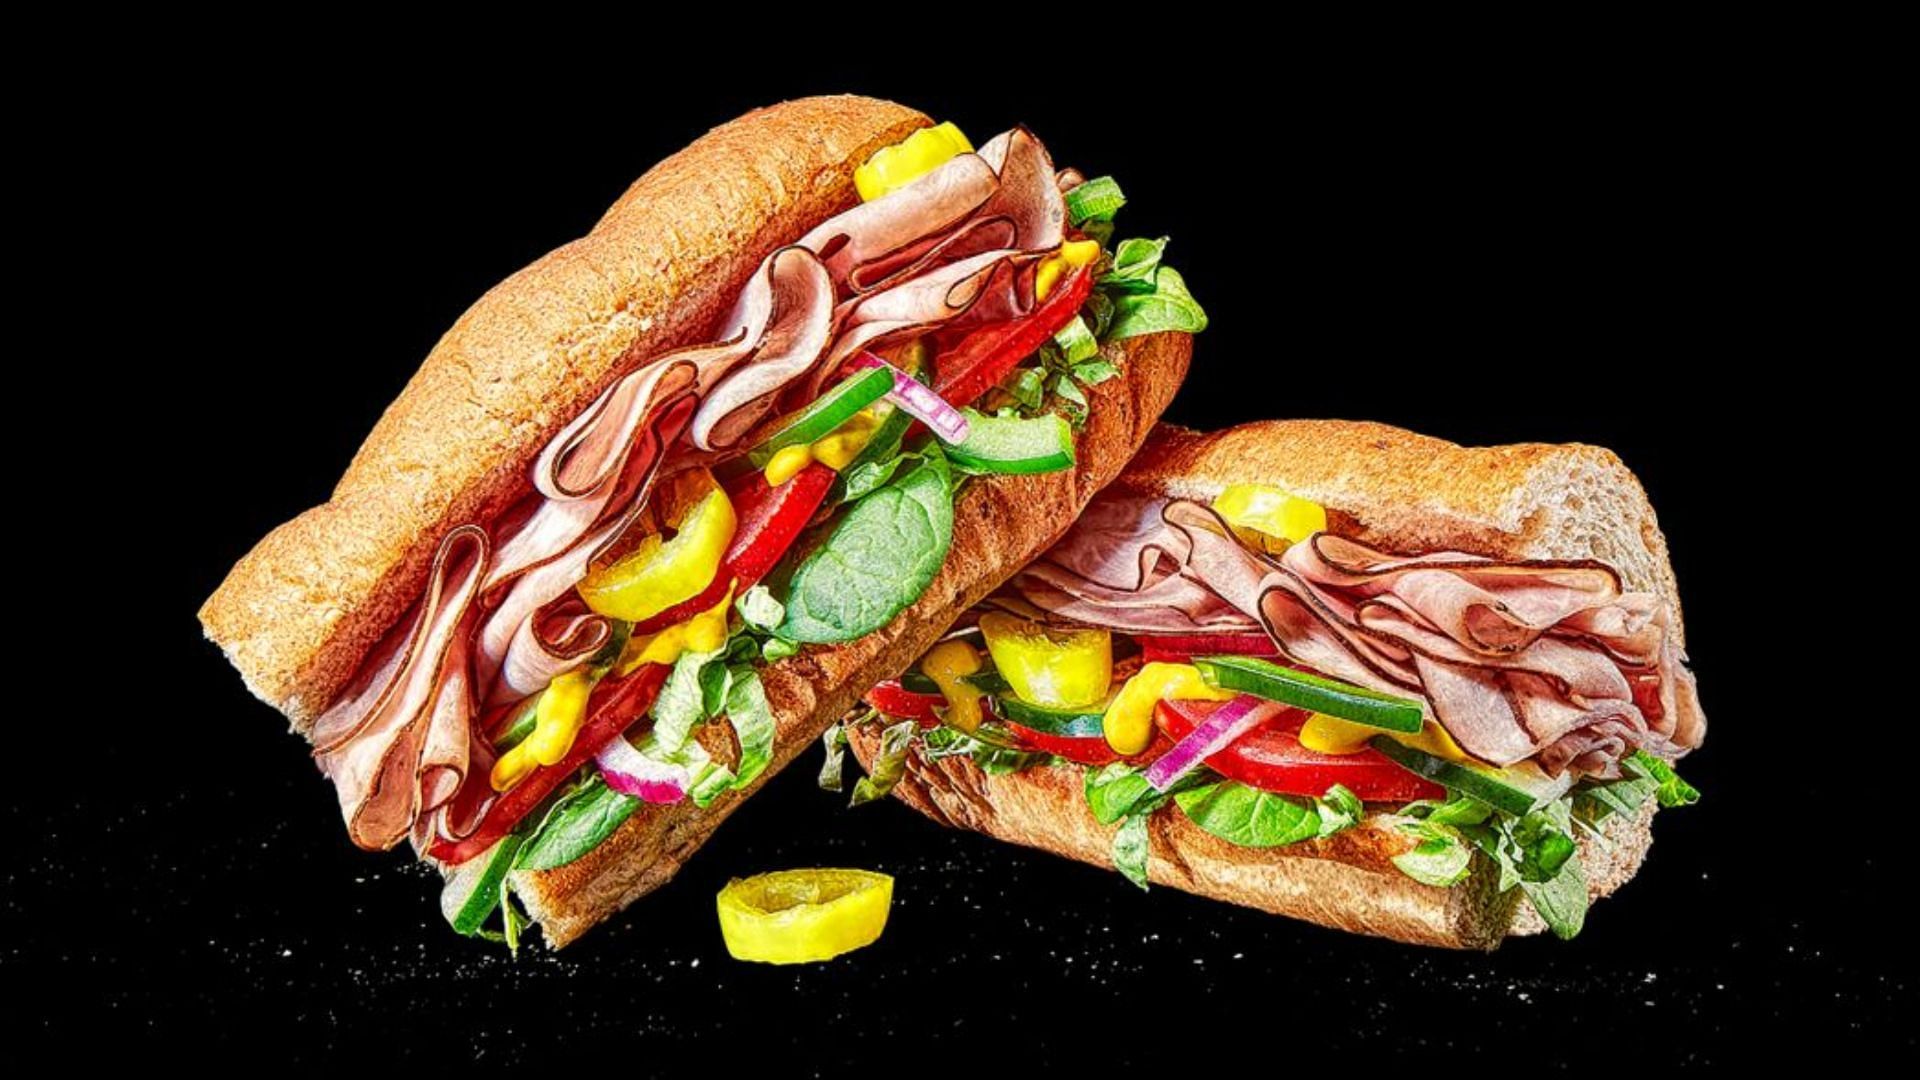 All Subway restaurants across the country will be switching to in-store meat slicing for all sandwiches (Image via Subway)